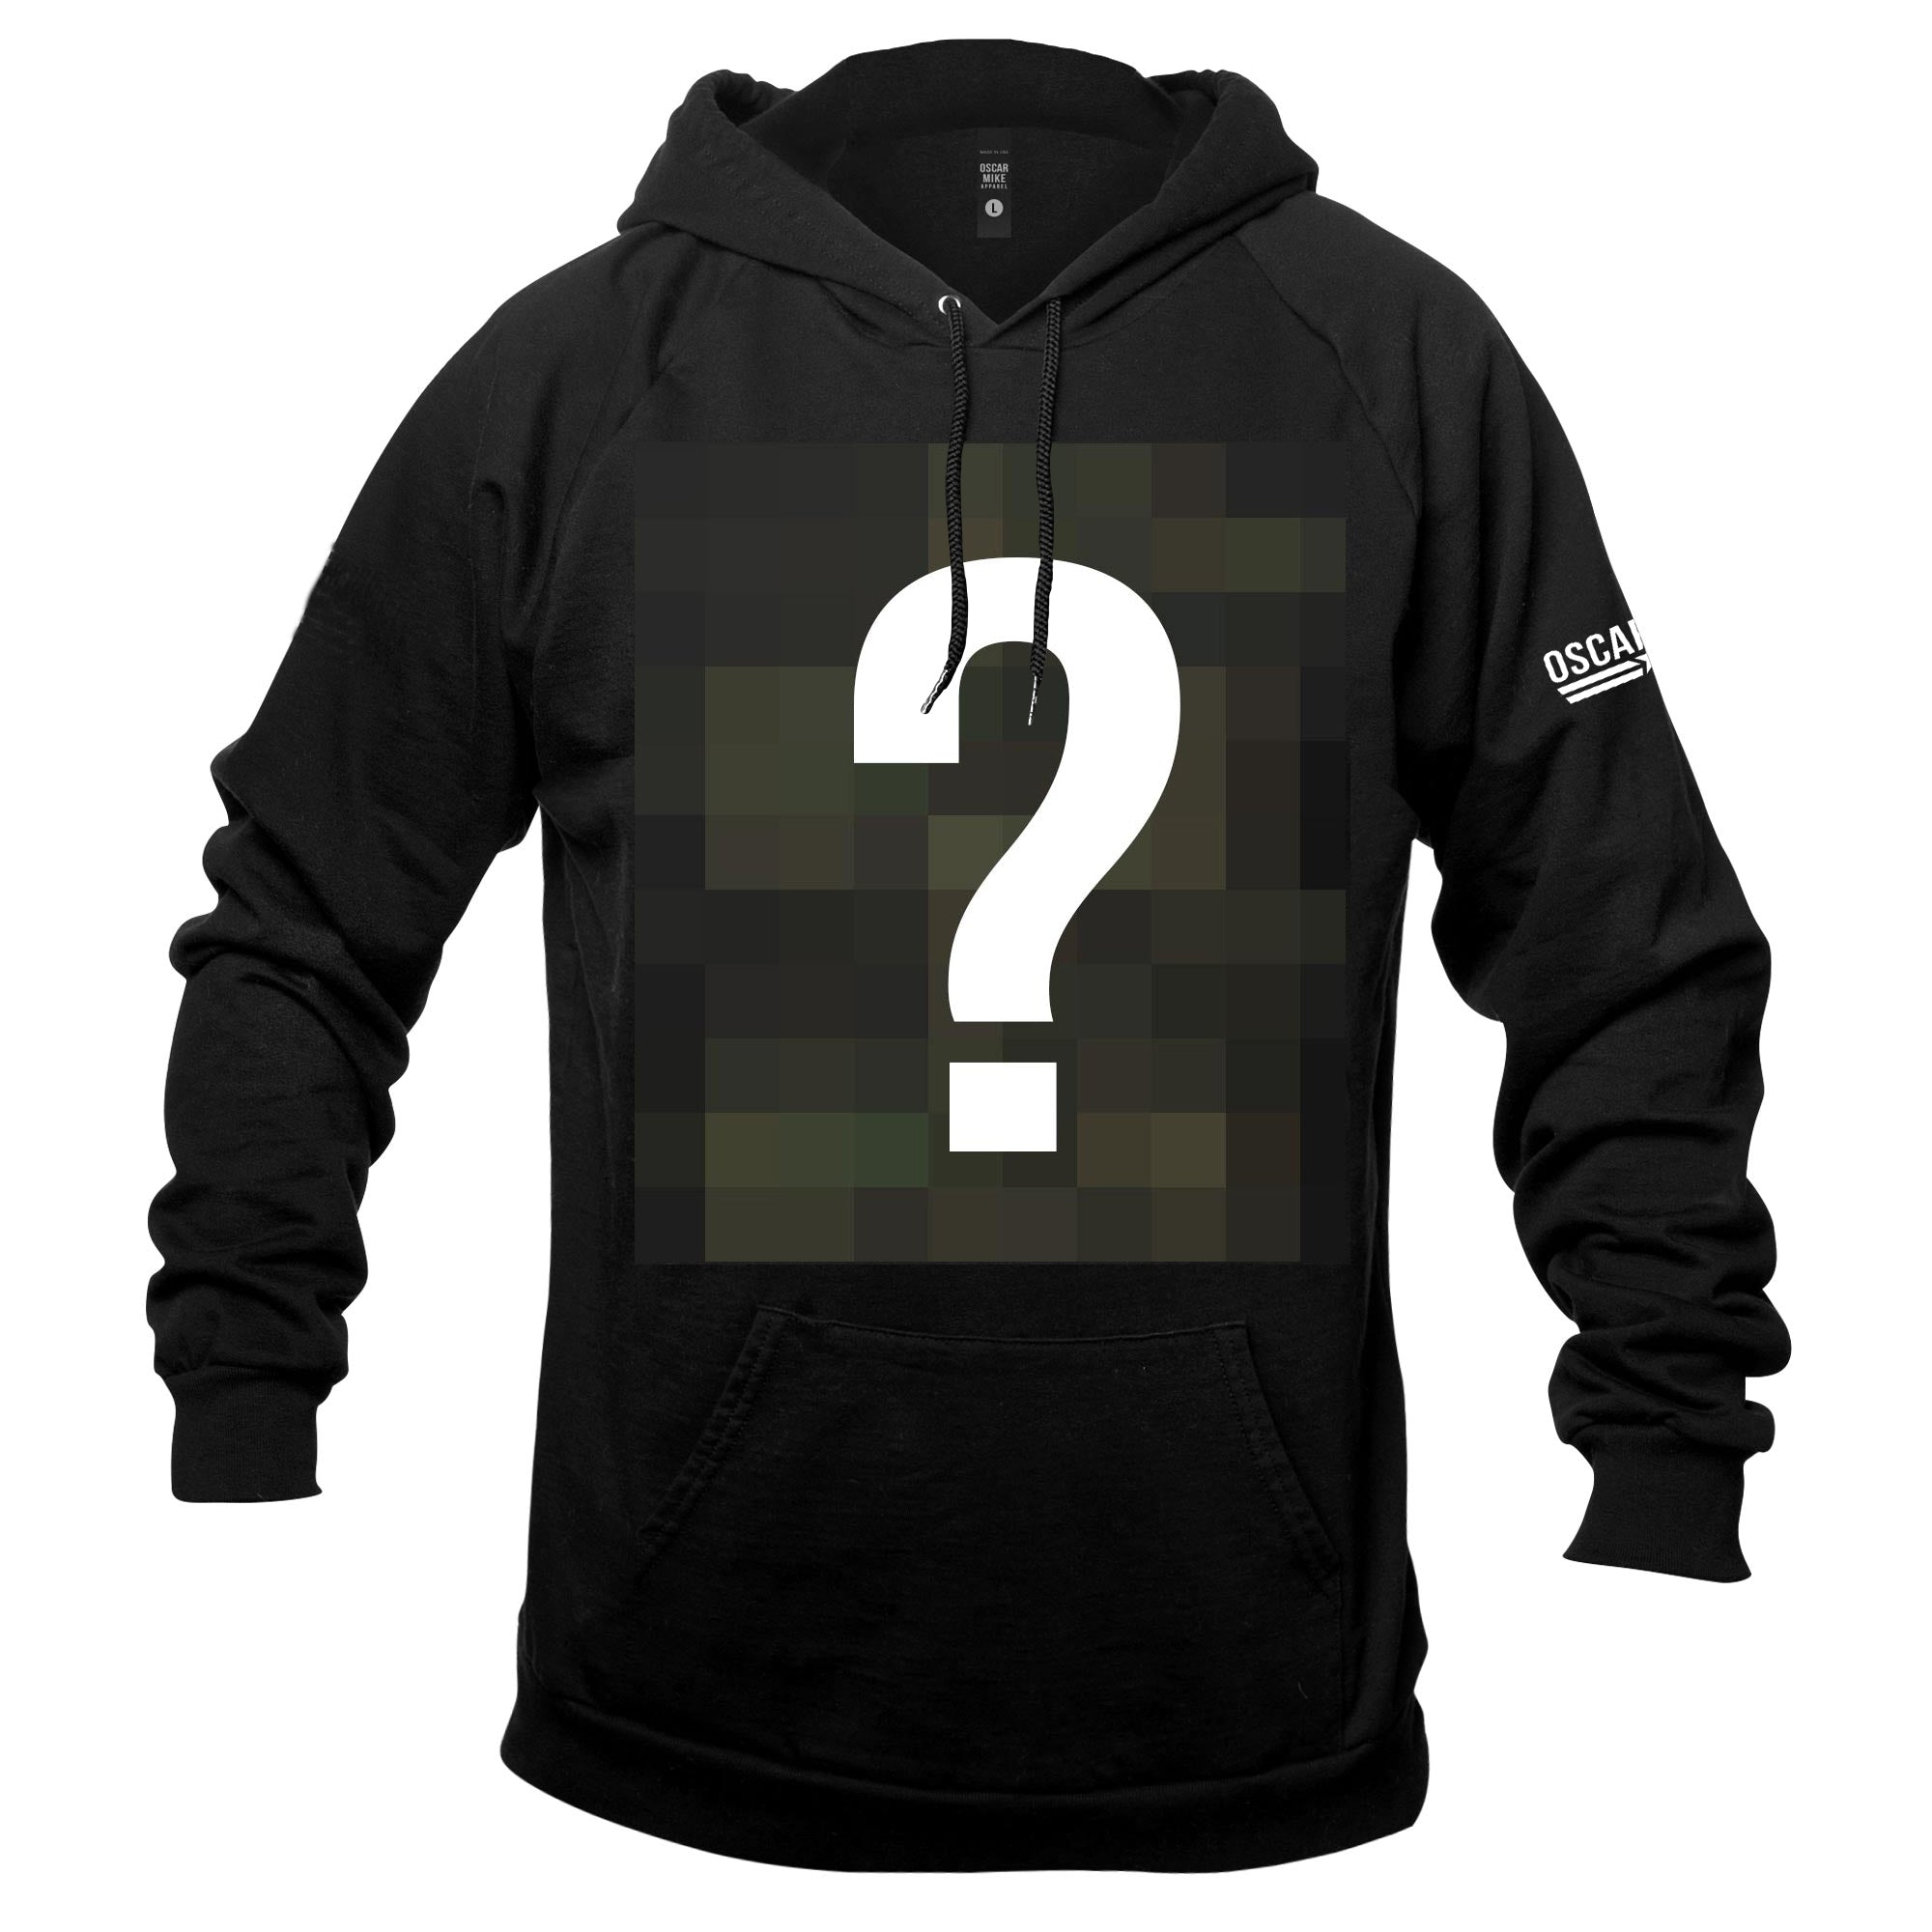 The Enigma Hoodie